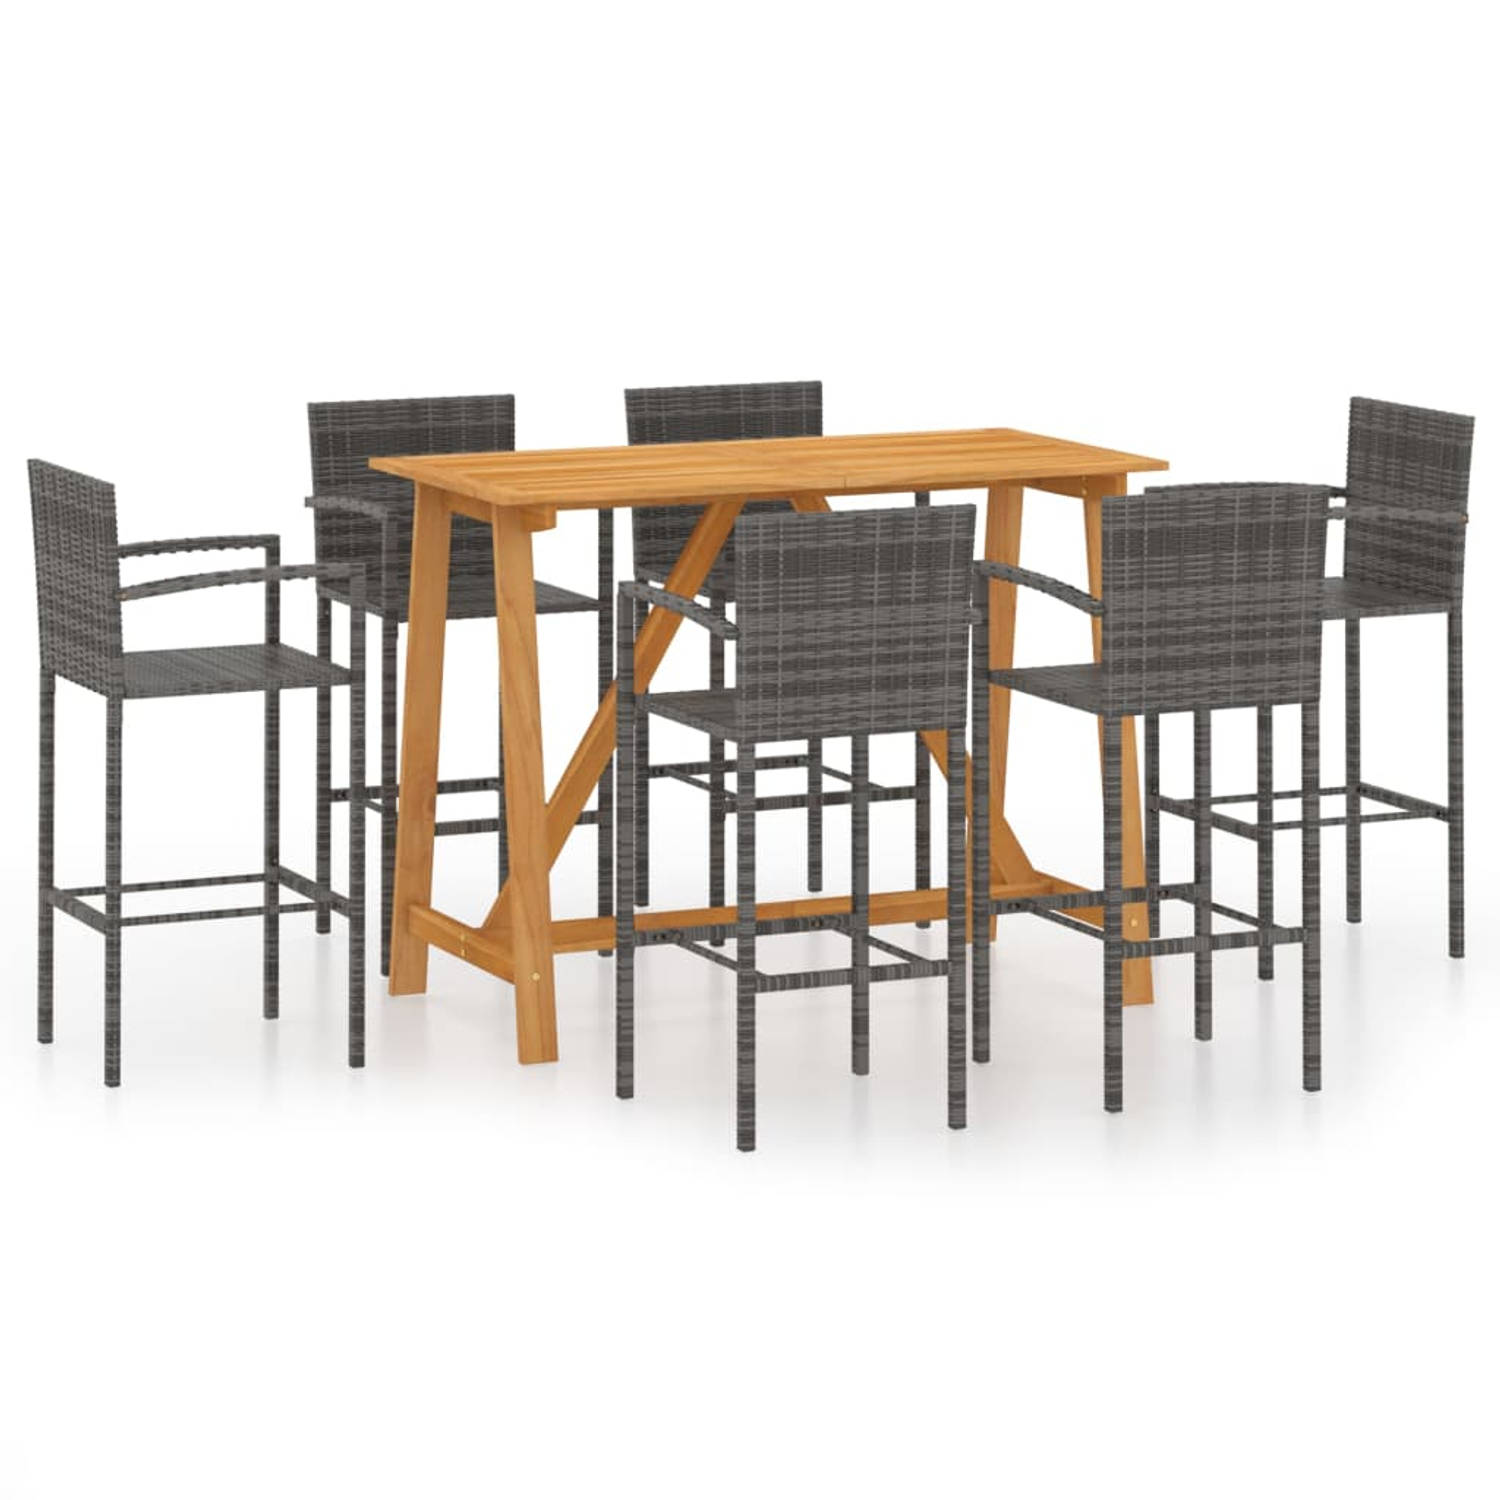 The Living Store Barset Tables and Chairs - Acacia Wood - 140 x 70 x 104 cm - Grey Rattan - 52 x 56 x 118 cm - Assembly Required - 1 Table and 6 Stools